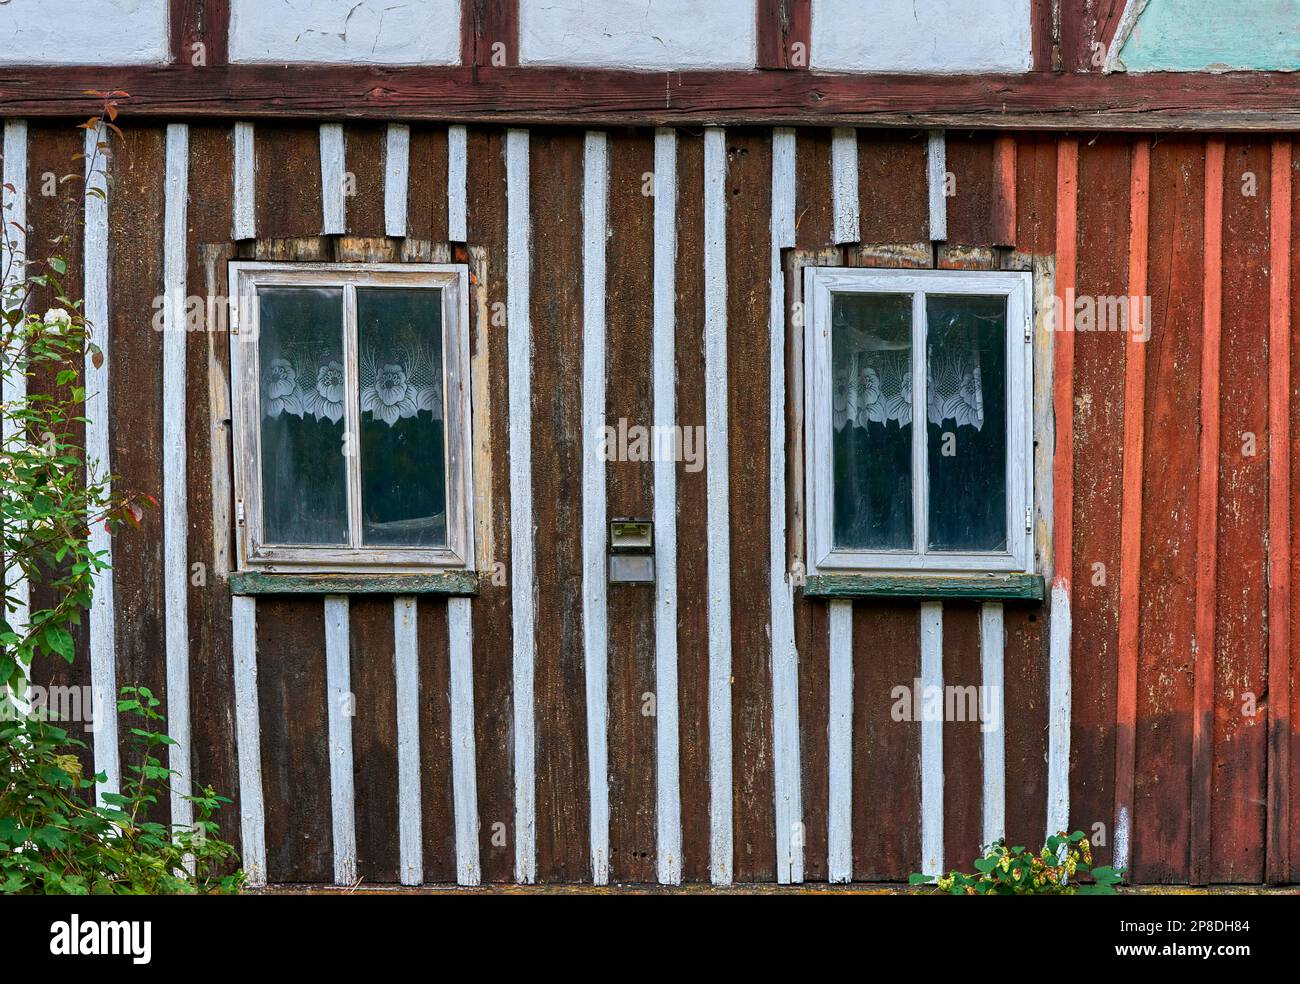 Wooden wall of the old house with the window and lace curtains Stock Photo